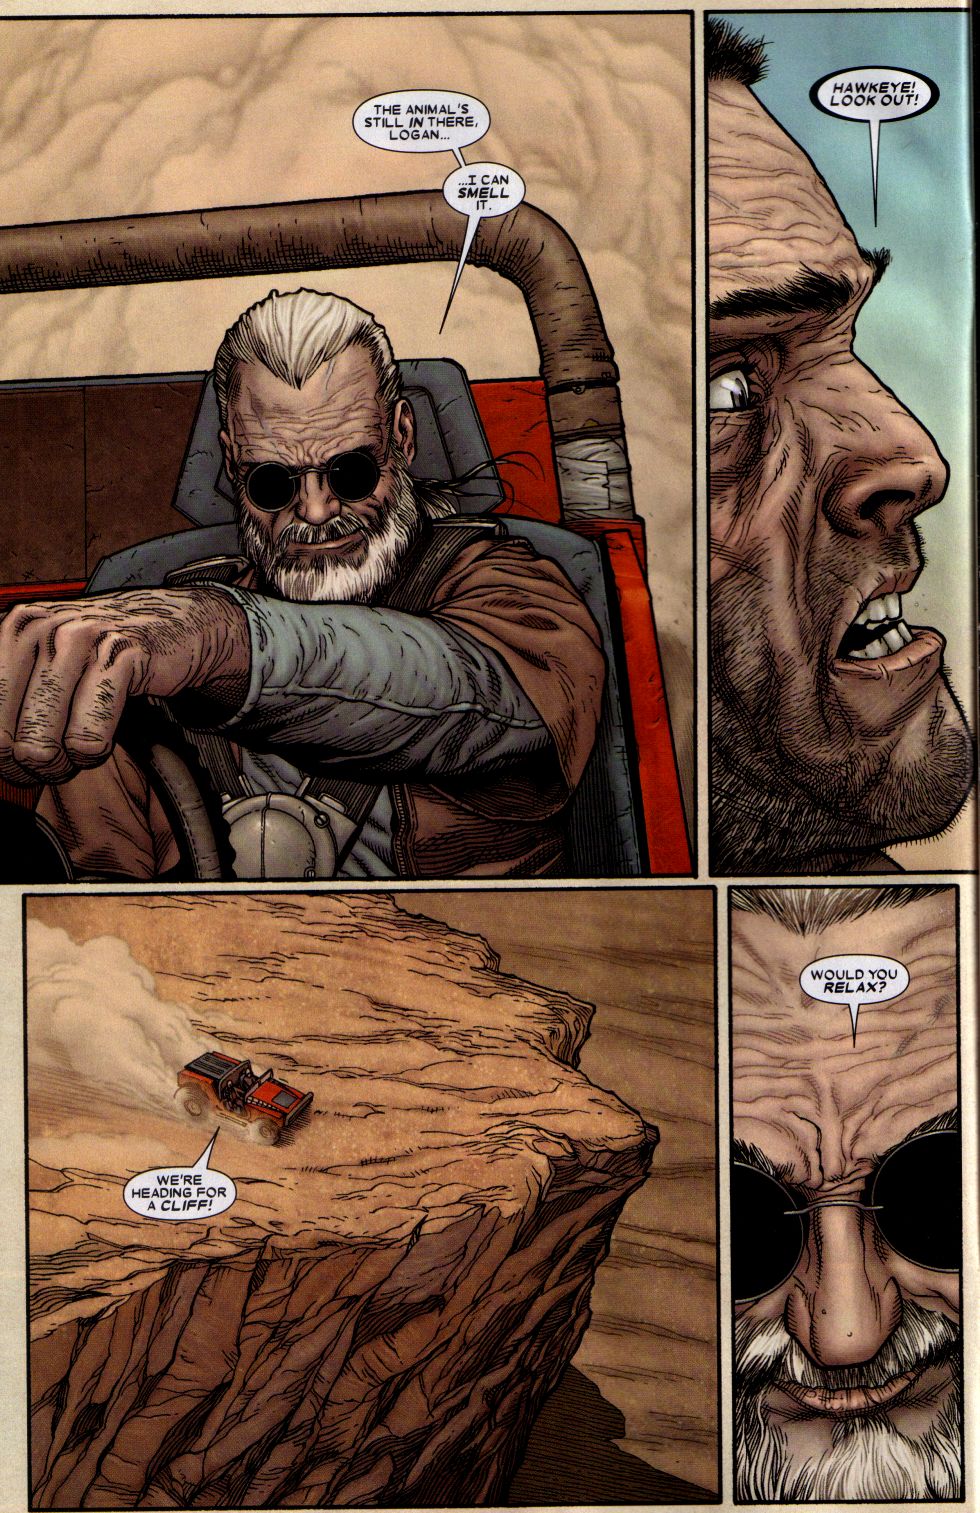 old man logan hawkeye - Hawkeye! Look Out The Animal'S Still In There, Logan... I Can Smell It. We'Re Heading For A Cliff!